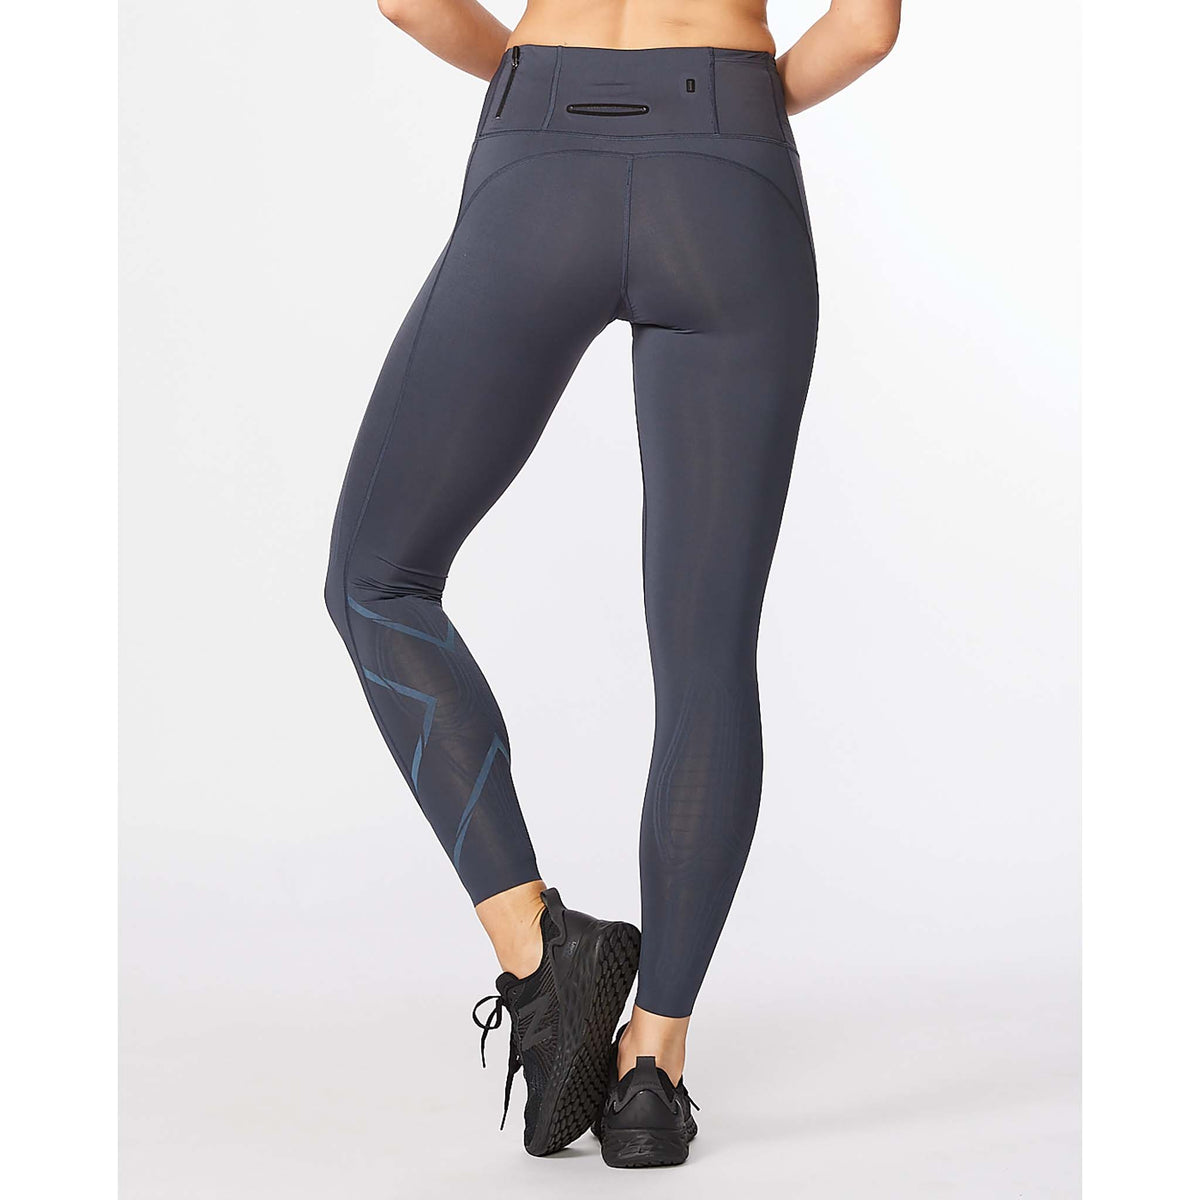 2XU Light Speed Mid-Rise Compression Tights legging compressif india ink femme dos